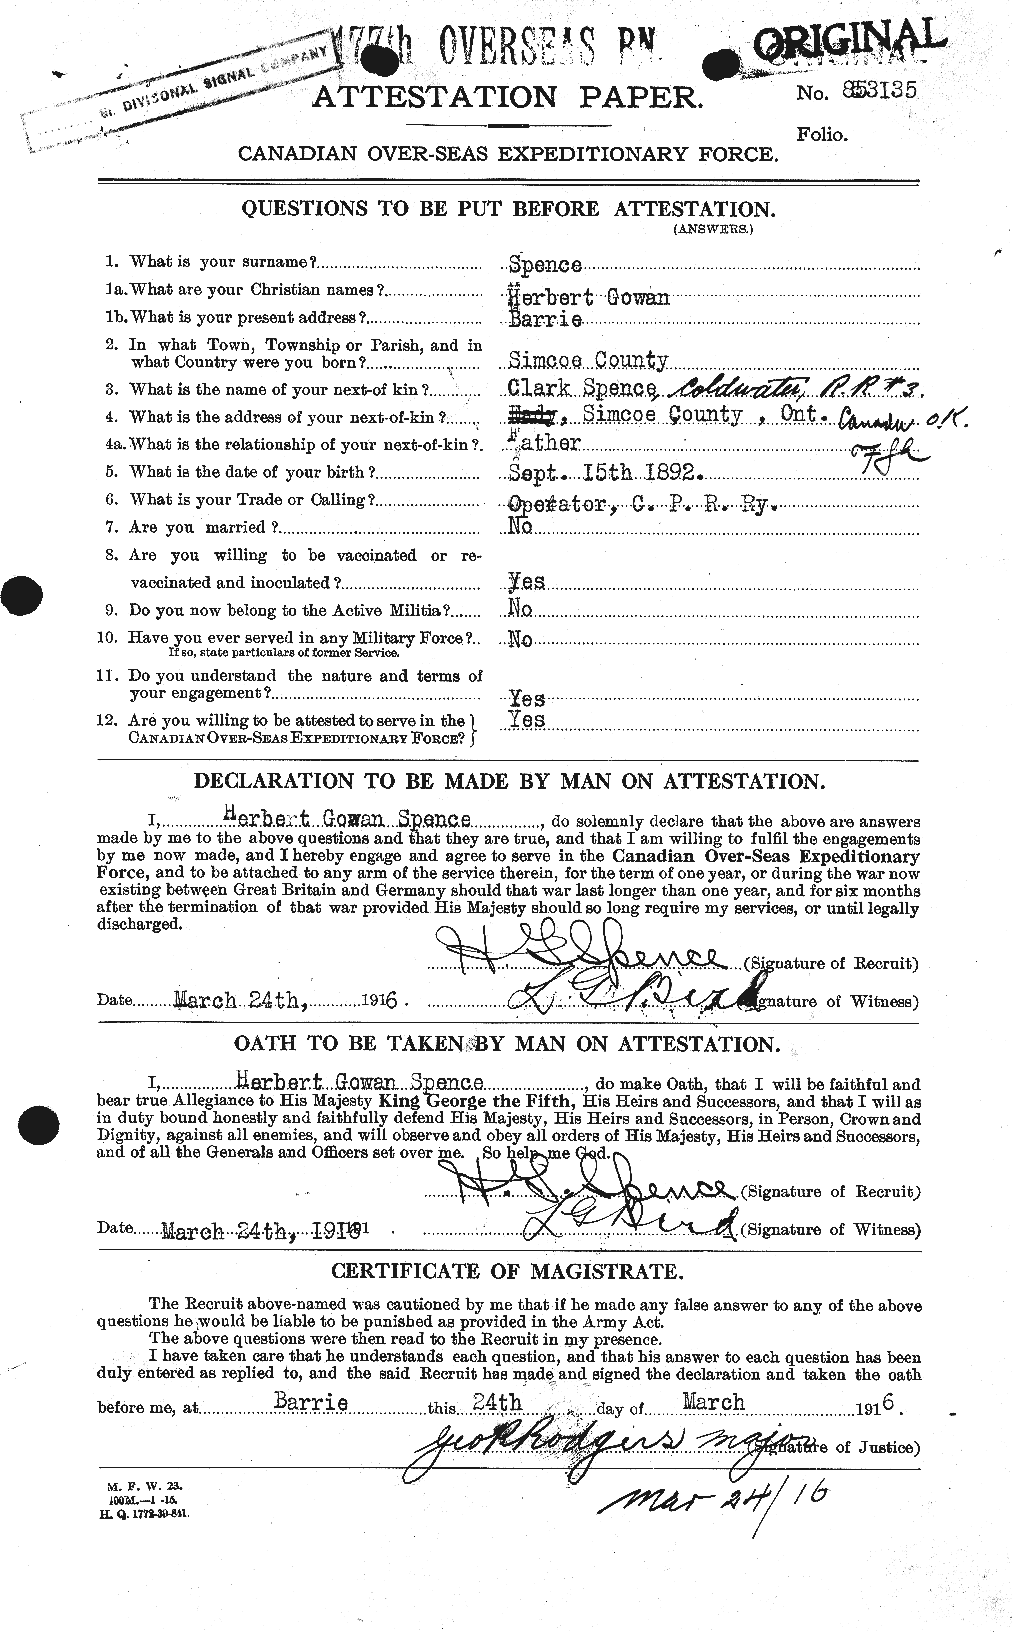 Personnel Records of the First World War - CEF 621338a